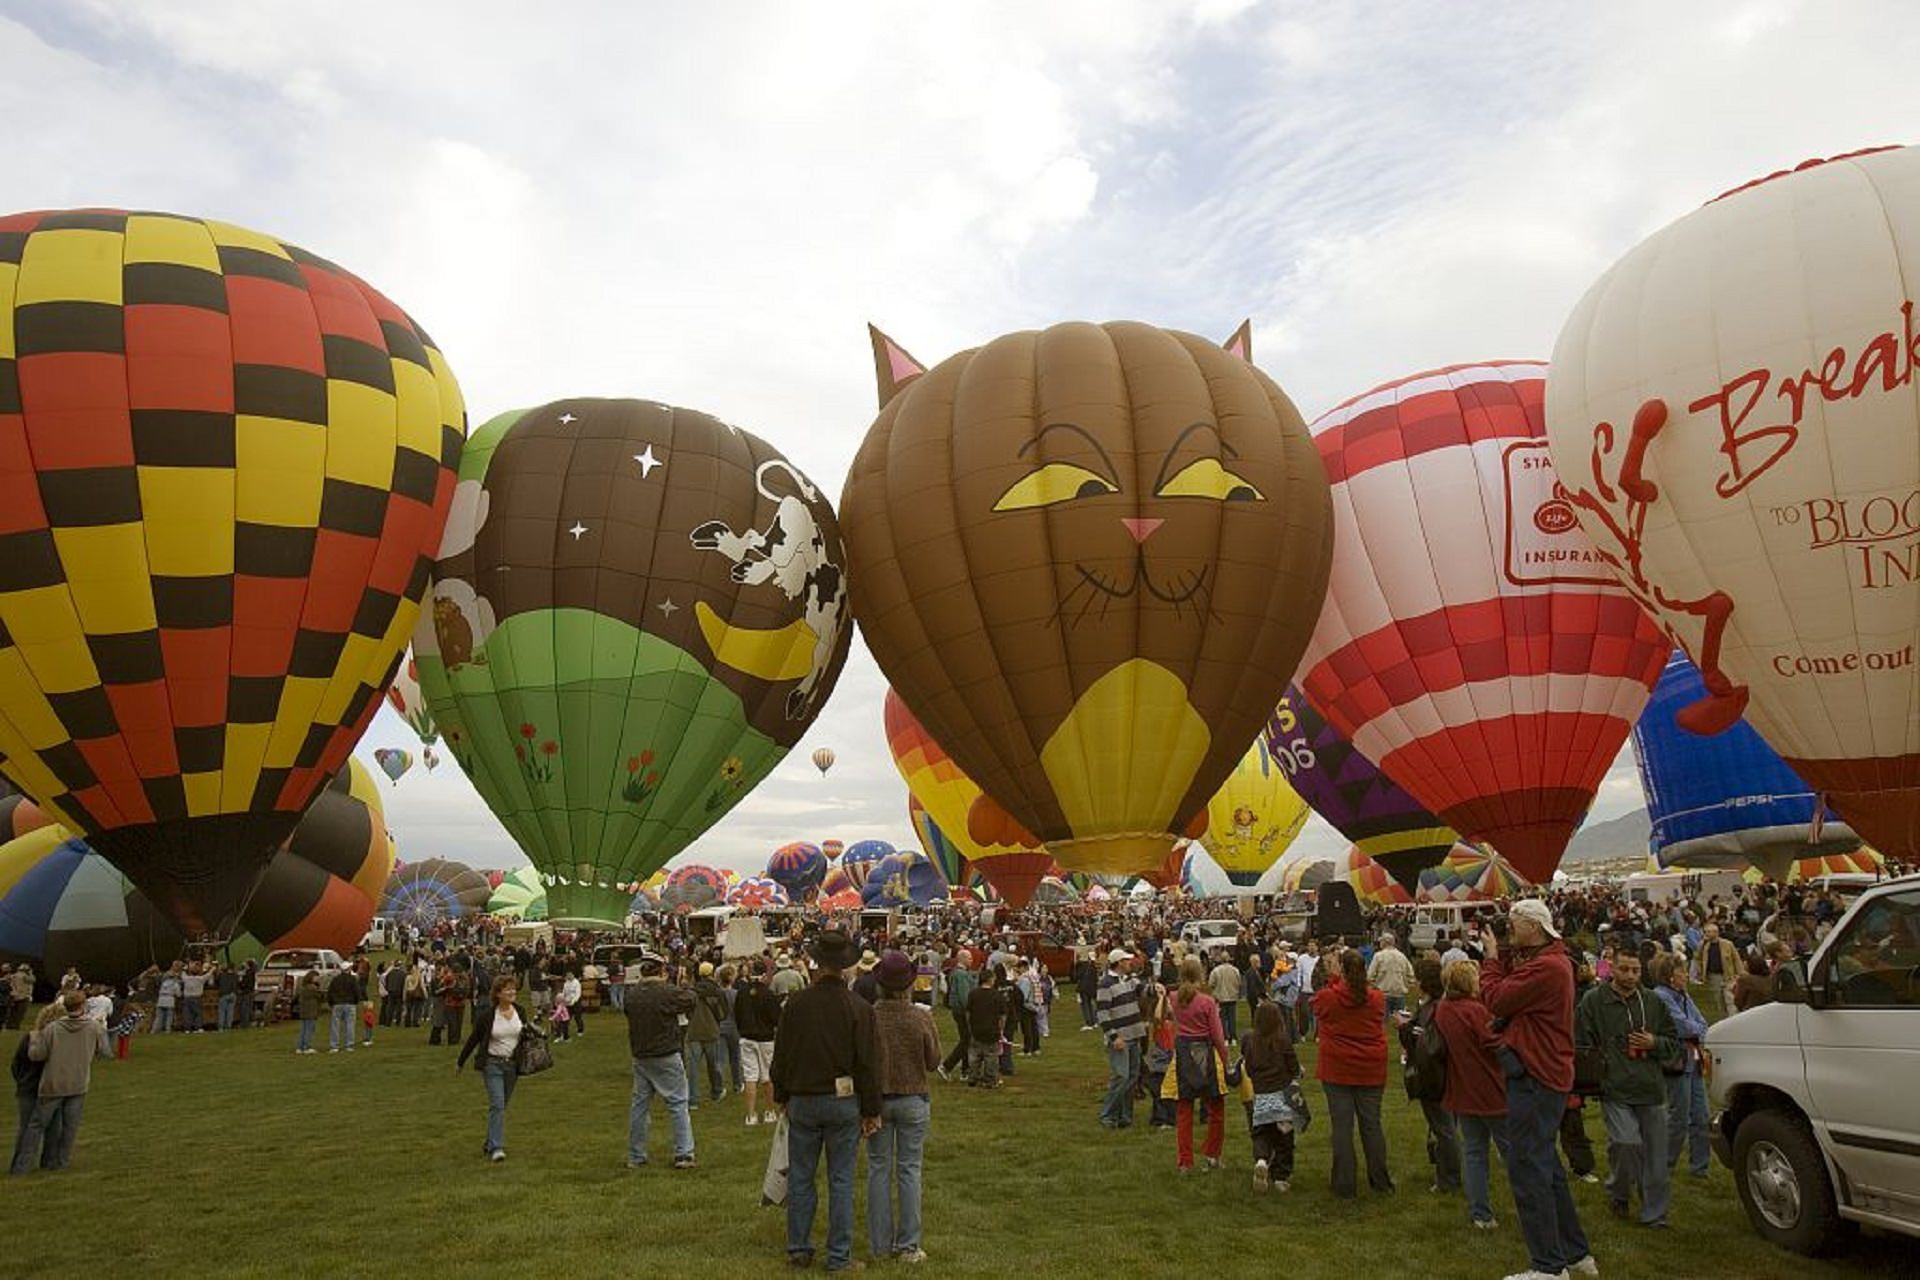 It's one of the few hot-air balloon festivals in the world where you're allowed to walk among the balloons.